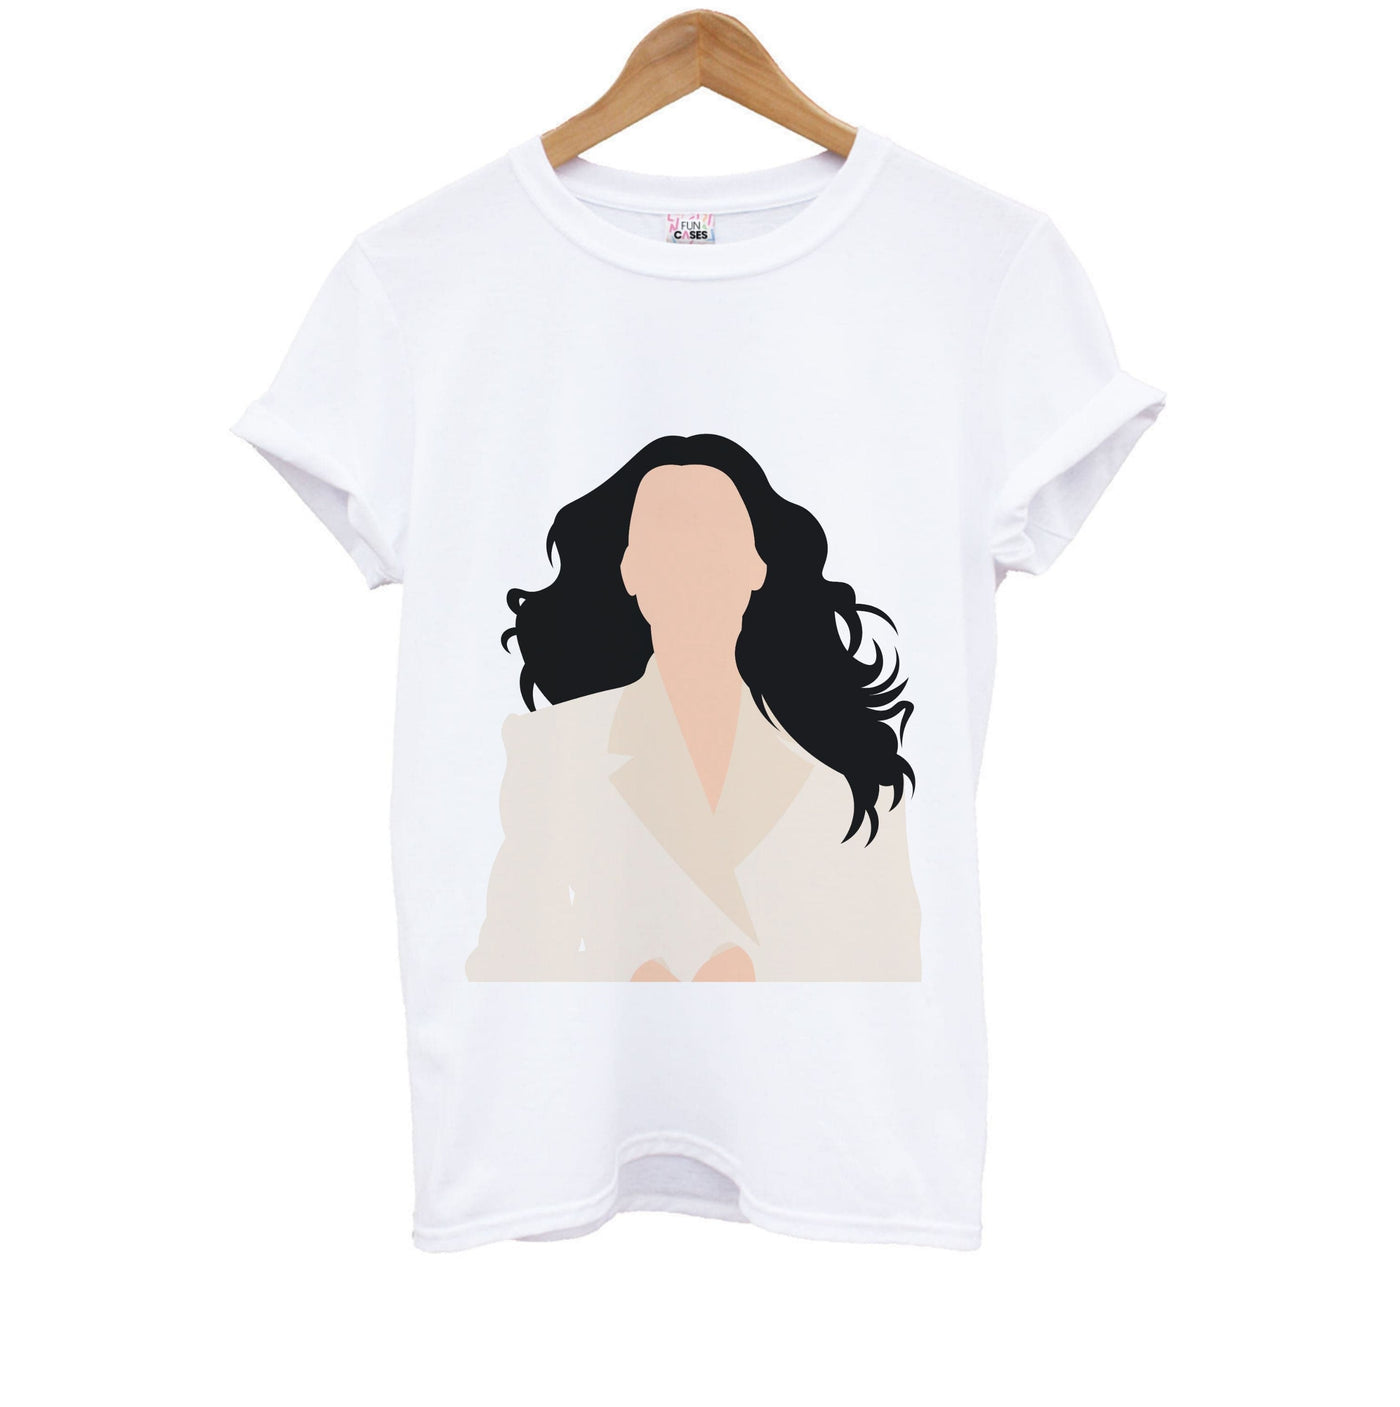 Her - Katy Perry Kids T-Shirt